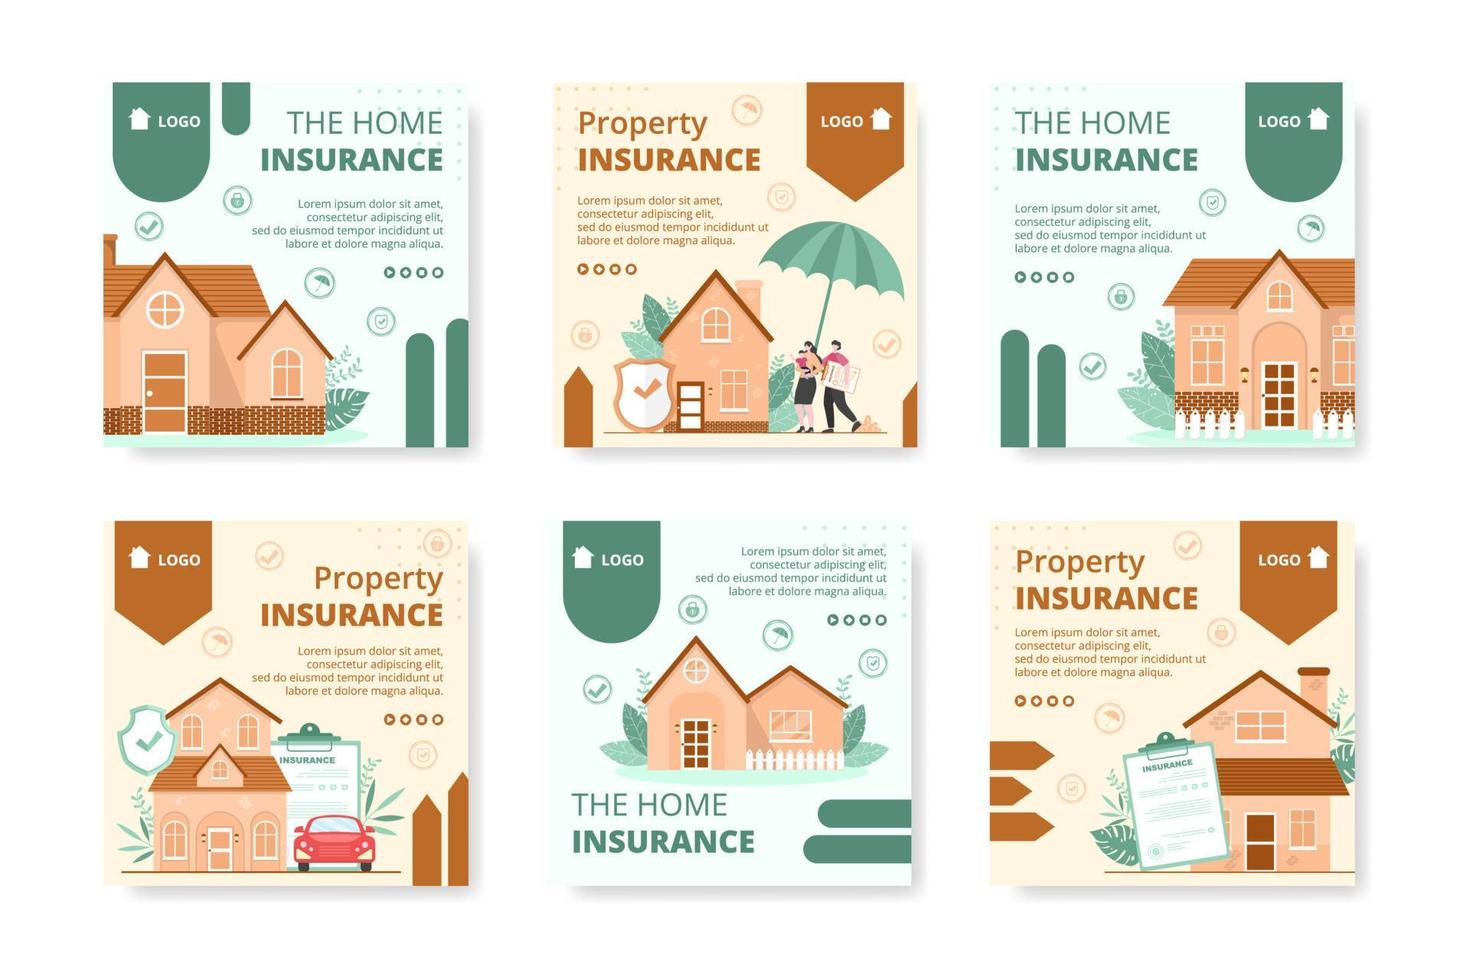 Property Insurance Post Template Flat Design Illustration Editable of Square Background Suitable for Social media, Greeting Card and Web Internet Ads vector